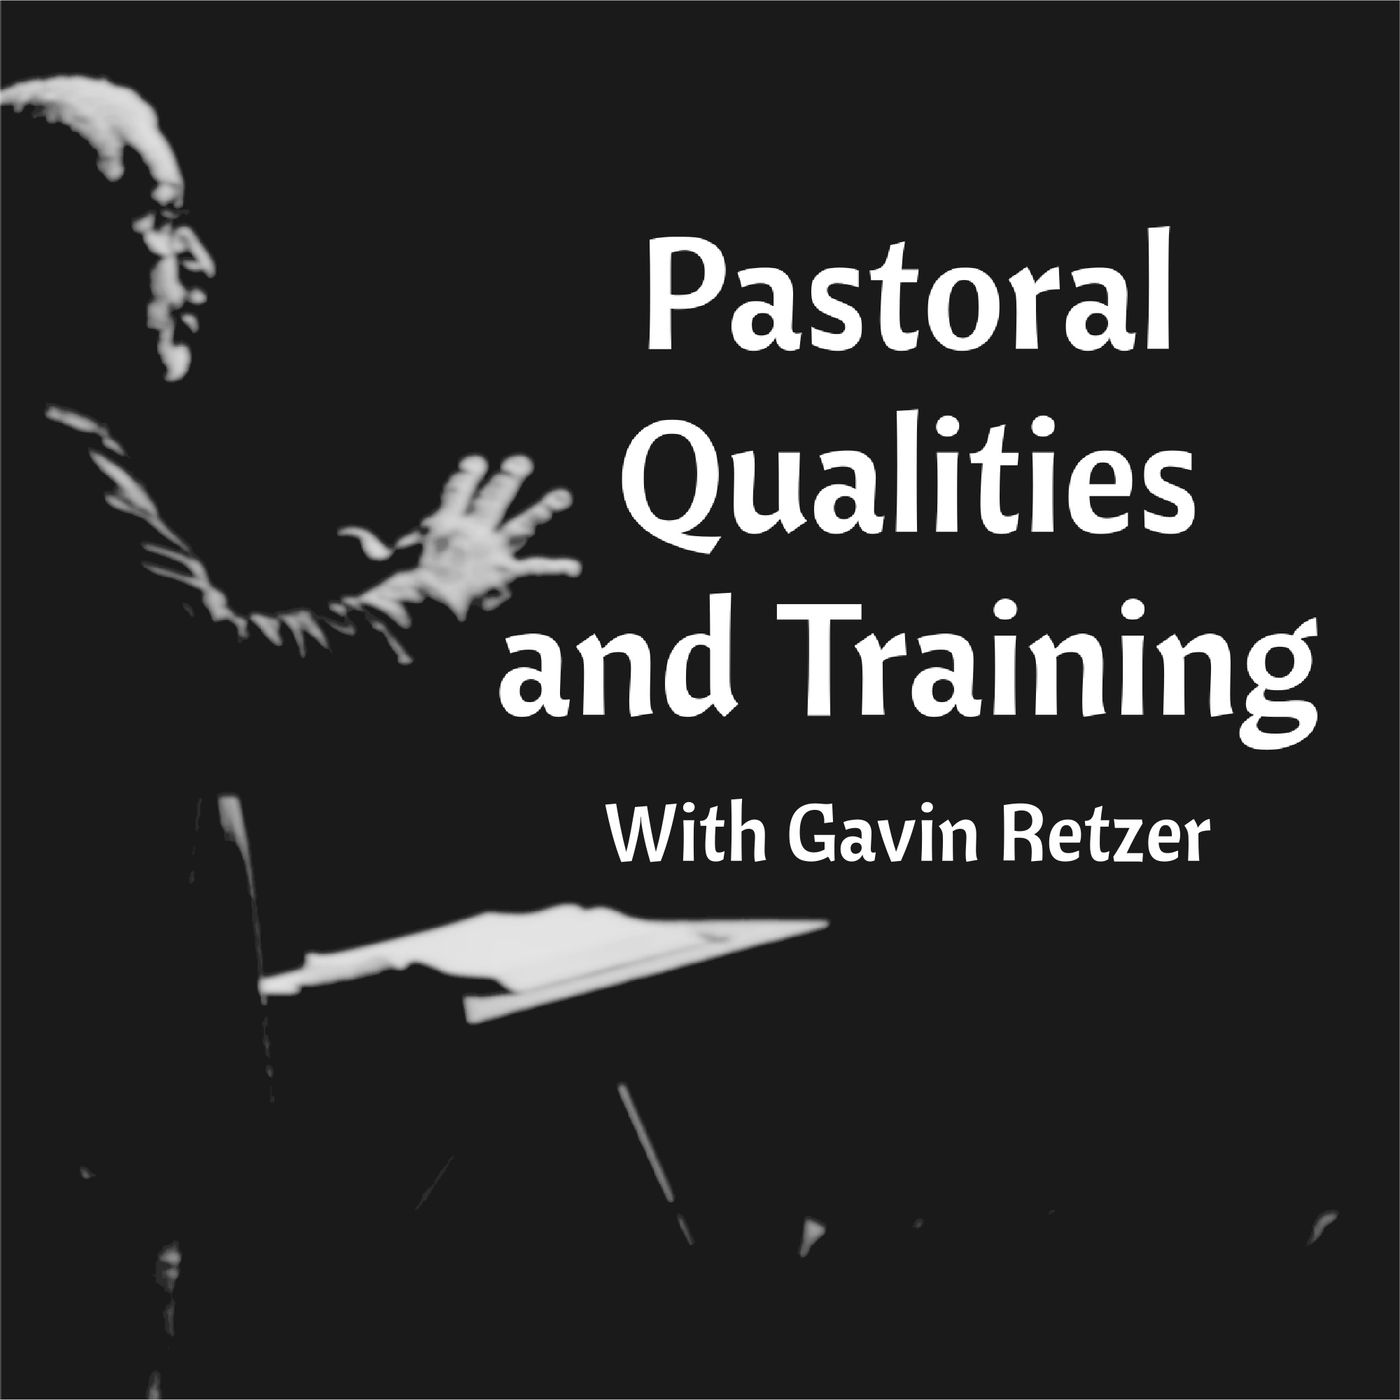 Pastoral Qualities and Training with Gavin Retzer